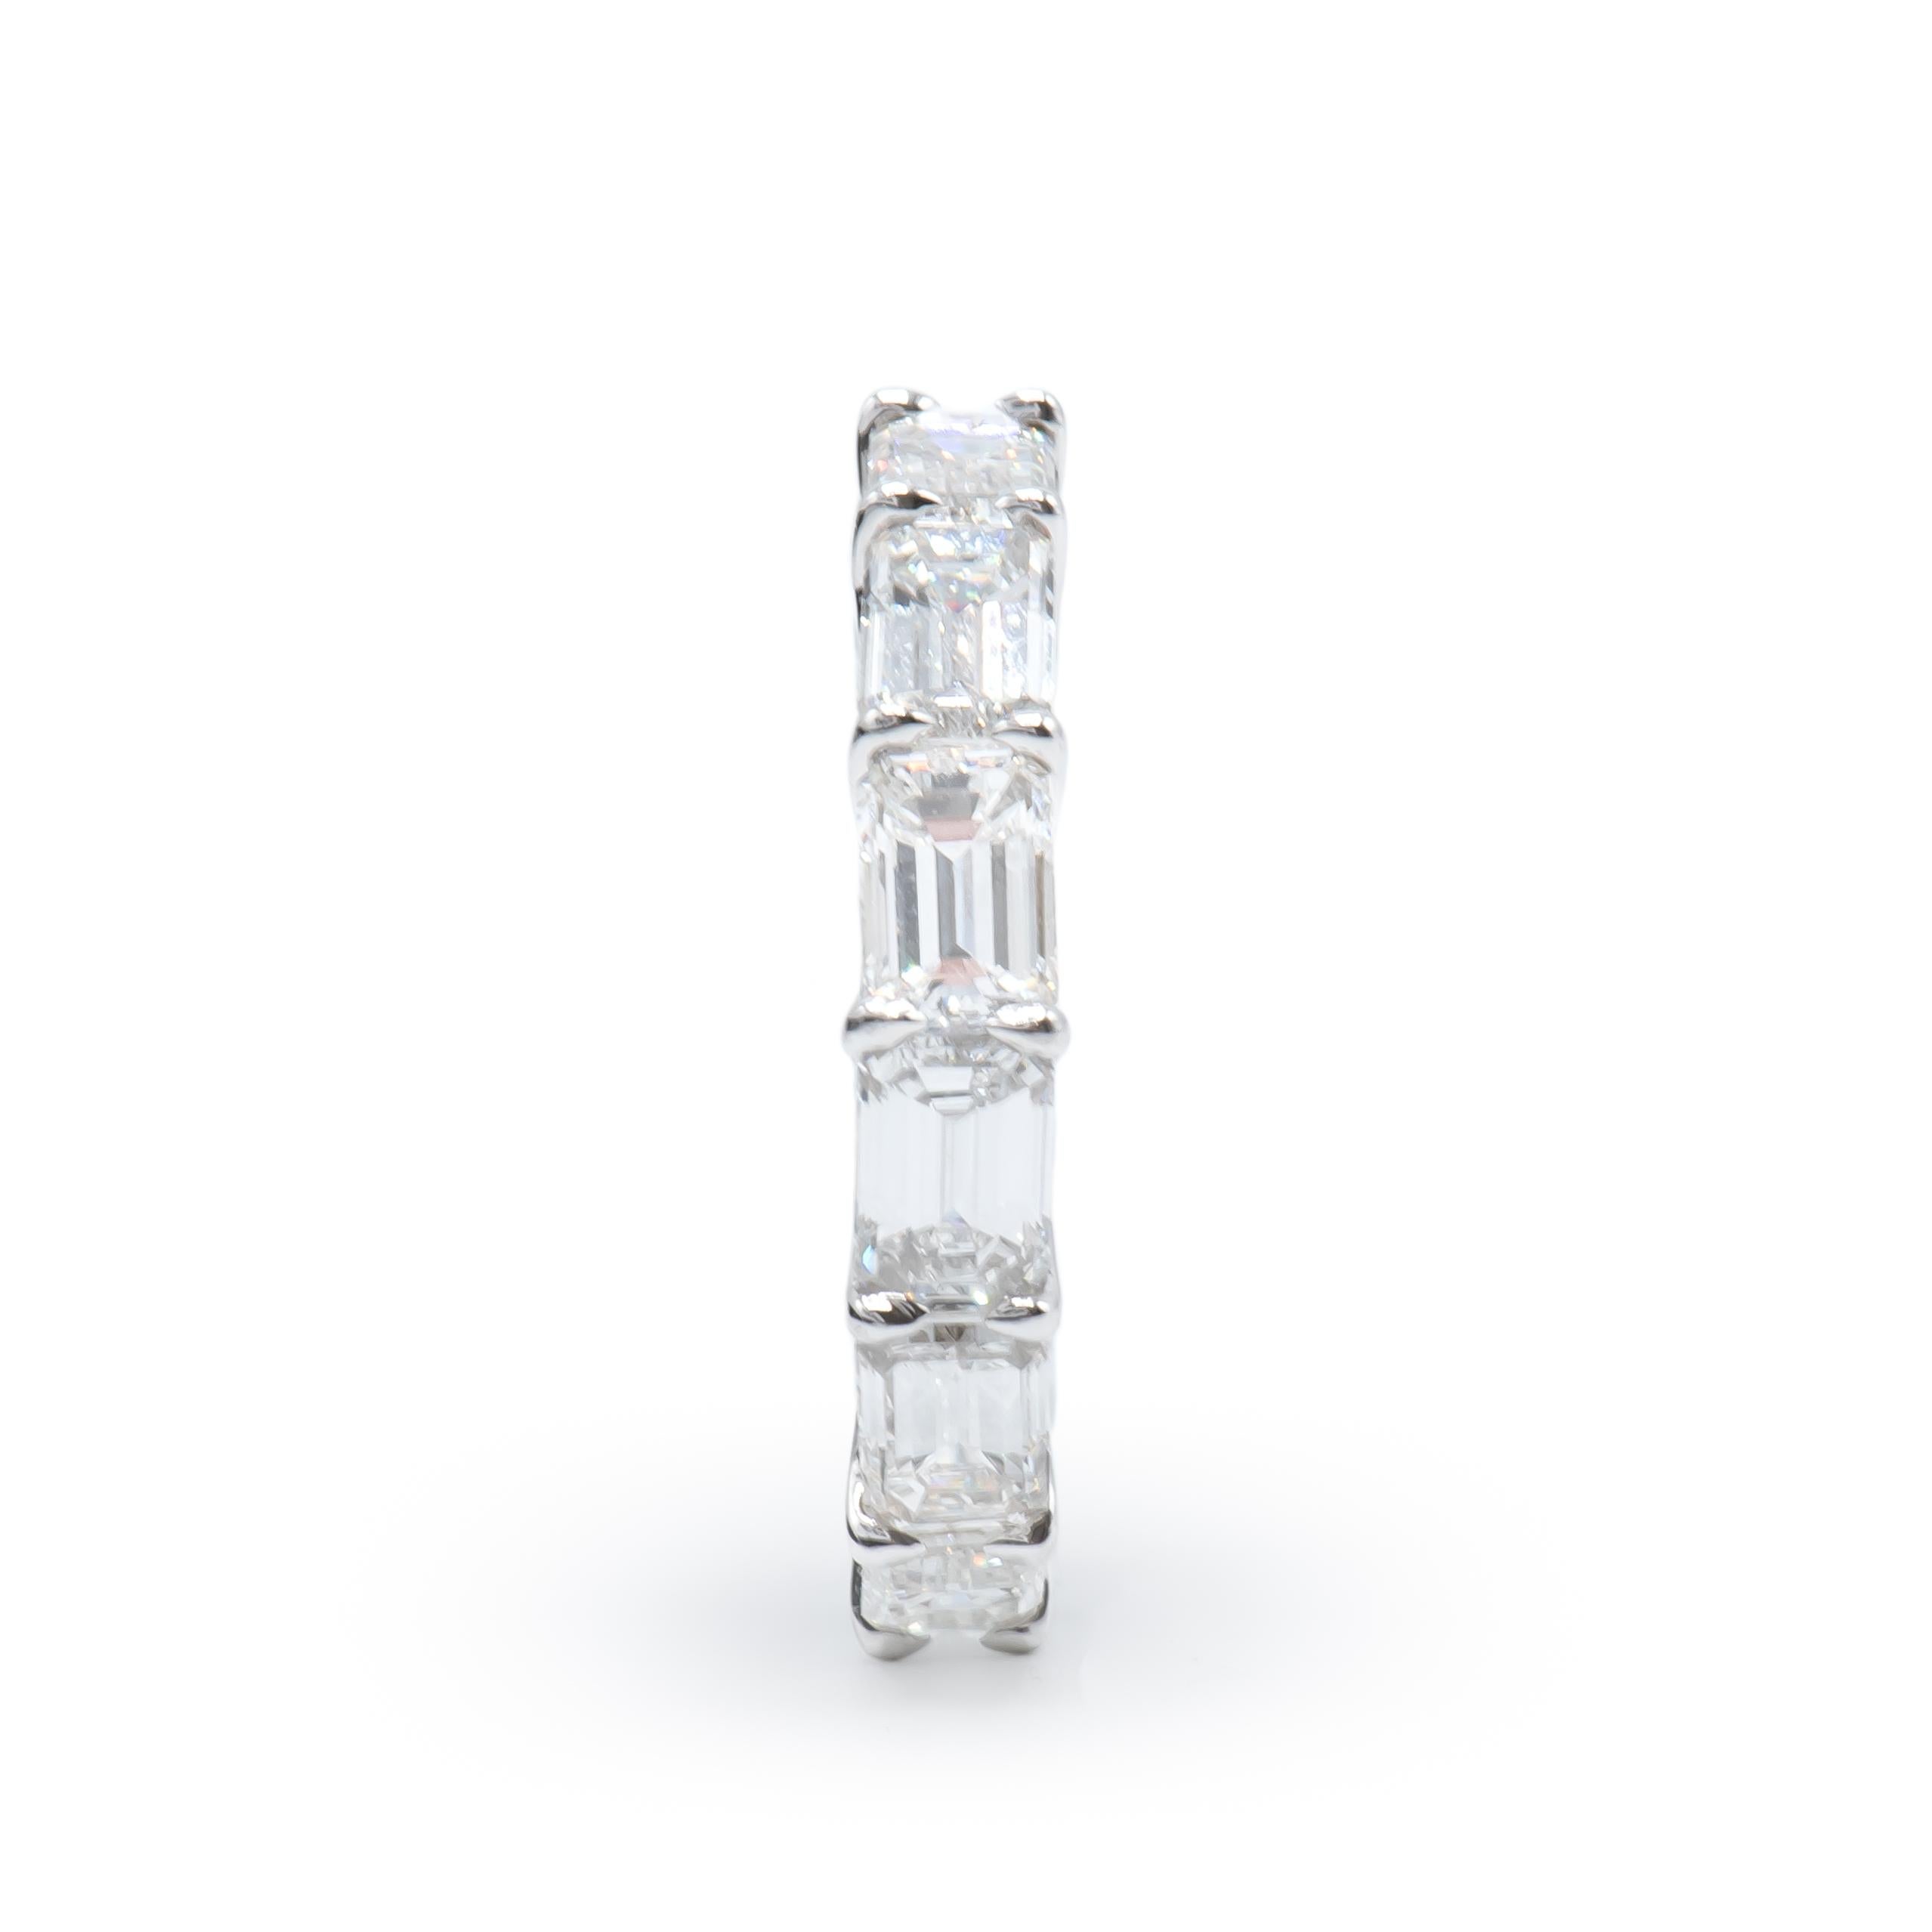 Classic Emerald Cut Diamond Eternity Band Horizontally Set featuring 13 Stones weighing a Total of 6.54 Carats. 
Diamonds are of F color and VS Clarity.
Set in Platinum.
Size 7